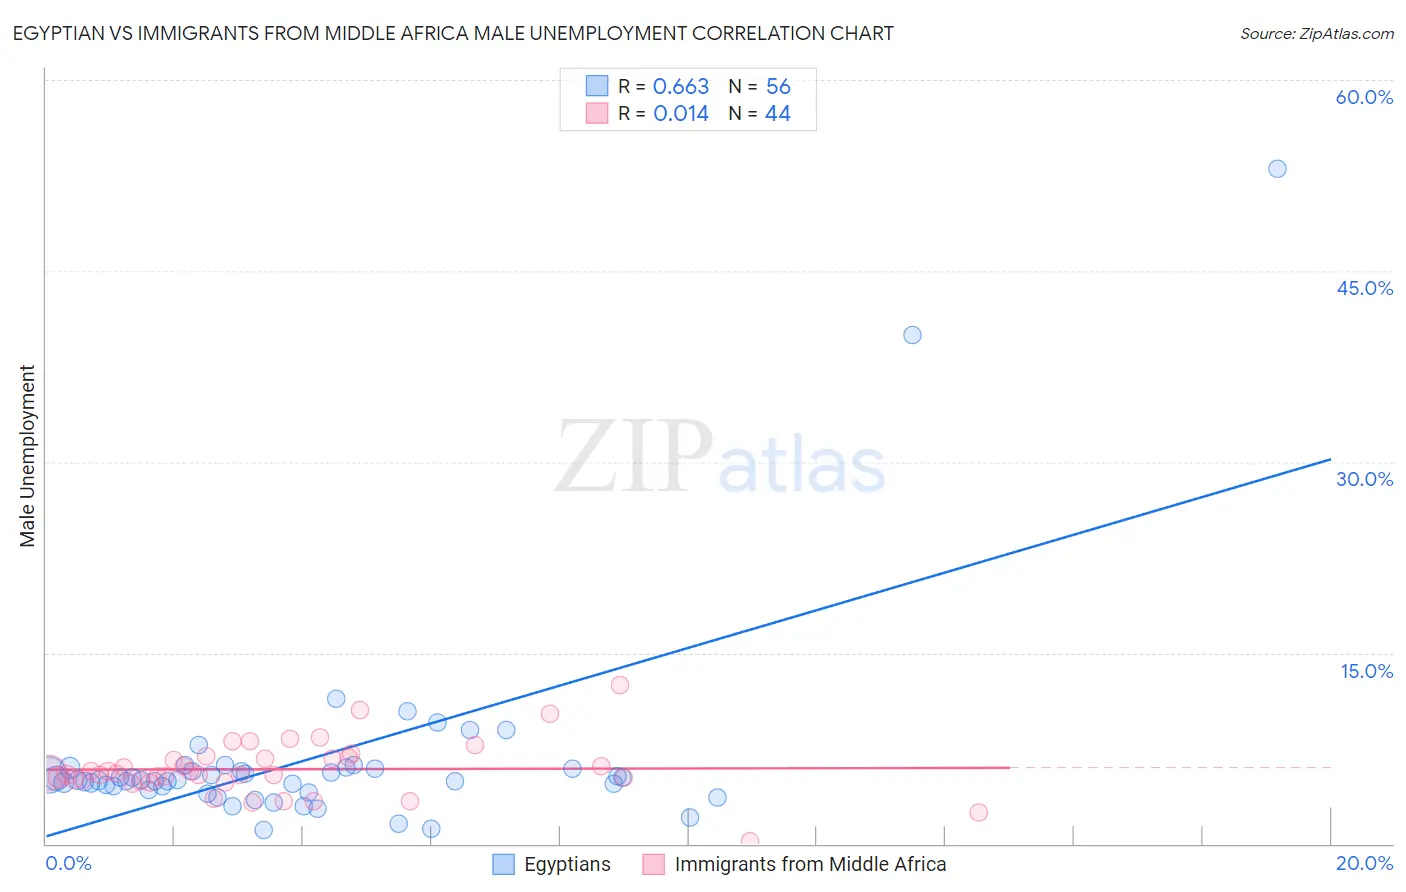 Egyptian vs Immigrants from Middle Africa Male Unemployment